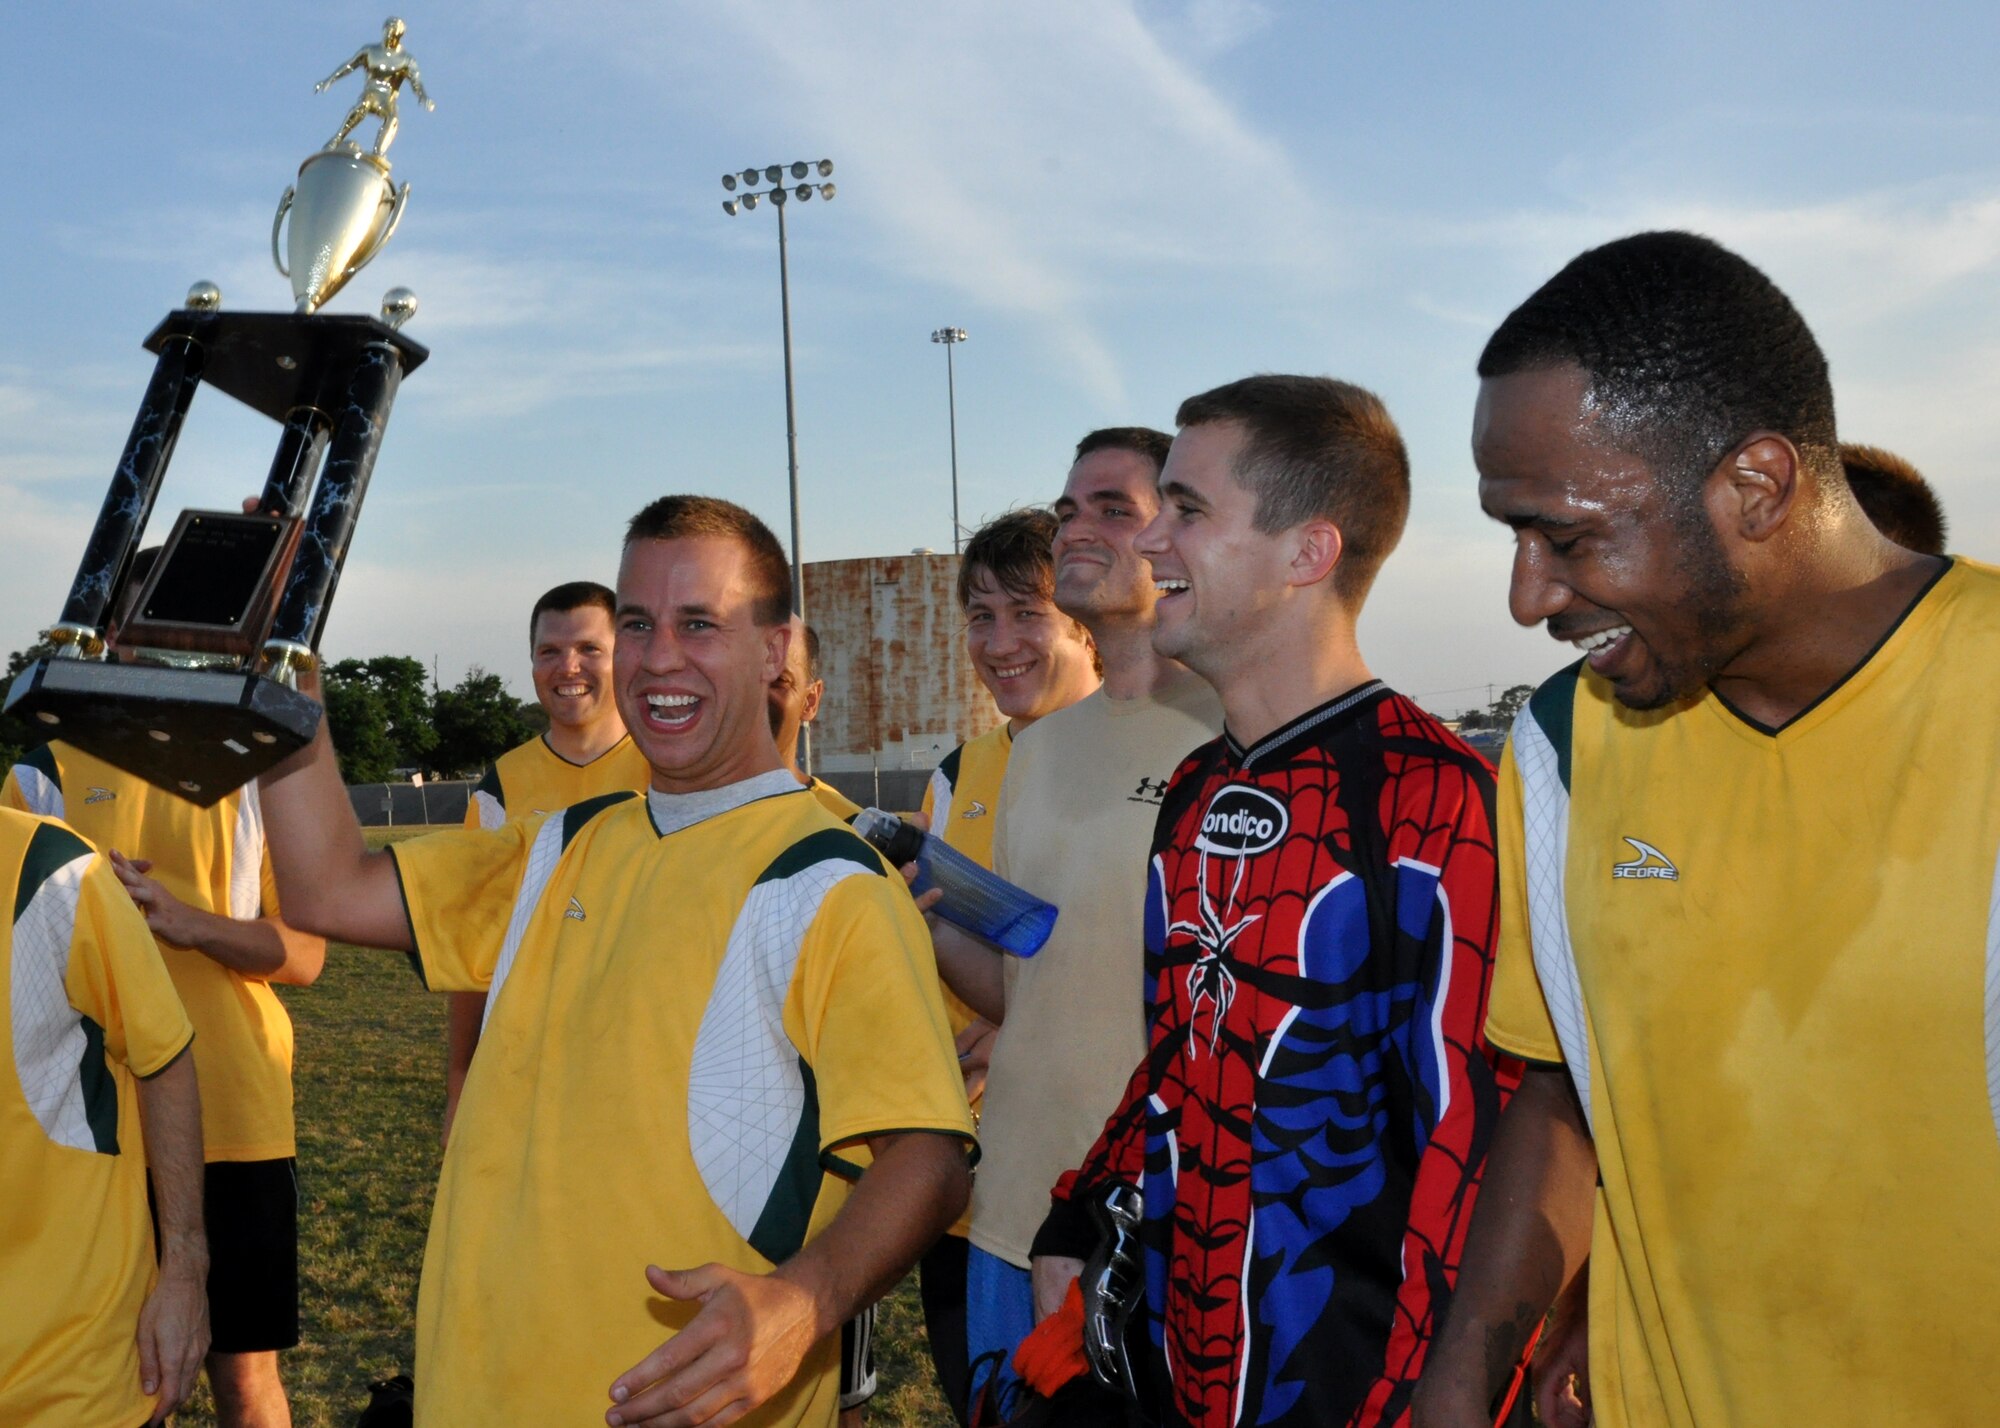 EGLIN AIR FORCE BASE, Fla. – the 46th Test Wing team celebrates winning the intramural soccer championship after beating the 53rd Wing 2-1 April 22. The 53rd team was the reigning champs, beating the 46th in a stunning sudden death shootout in overtime last year. (U.S. Air Force photo/ Airman 1st Class Anthony Jennings)